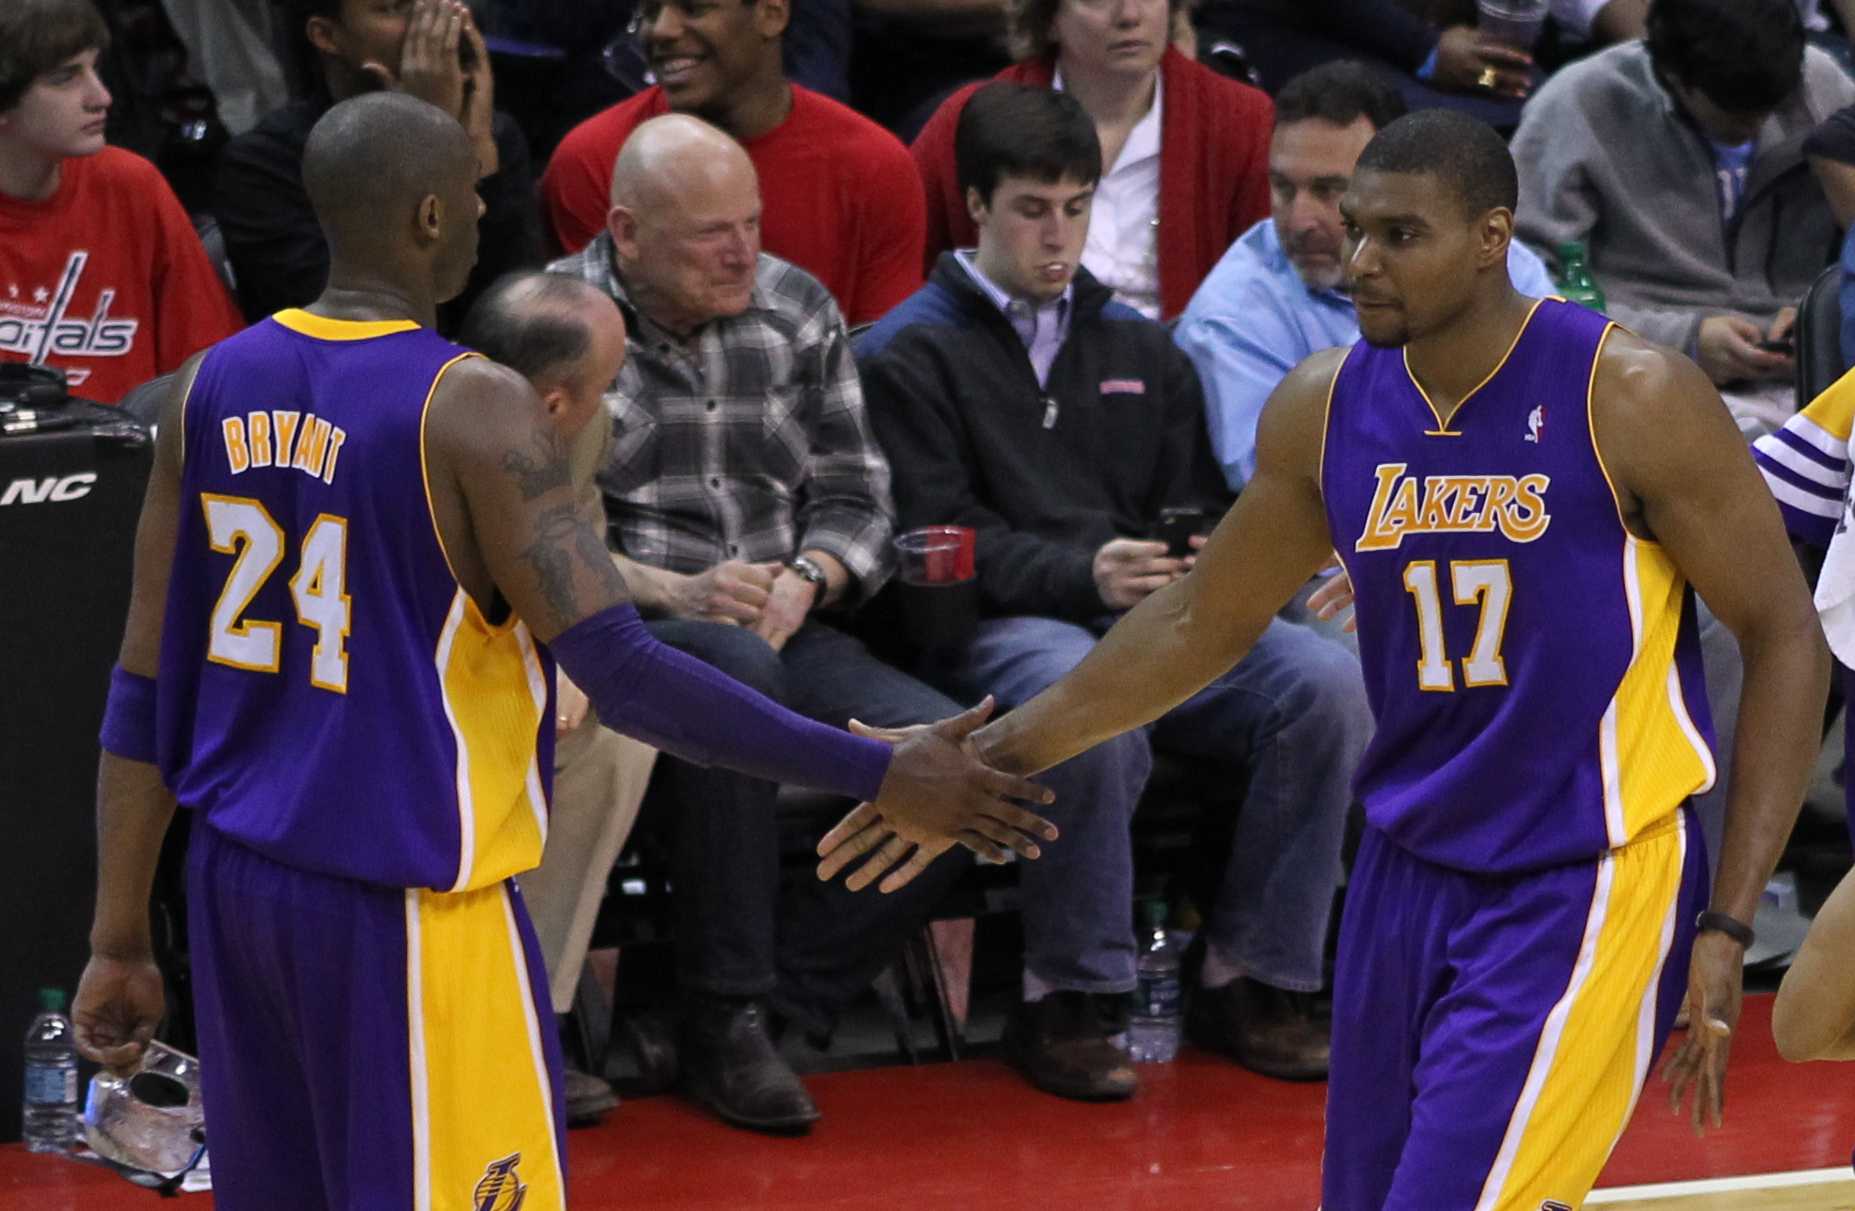 “We Did Not Like Each Other”: NBA Hall of Famer Details His Relationship With Kobe Bryant